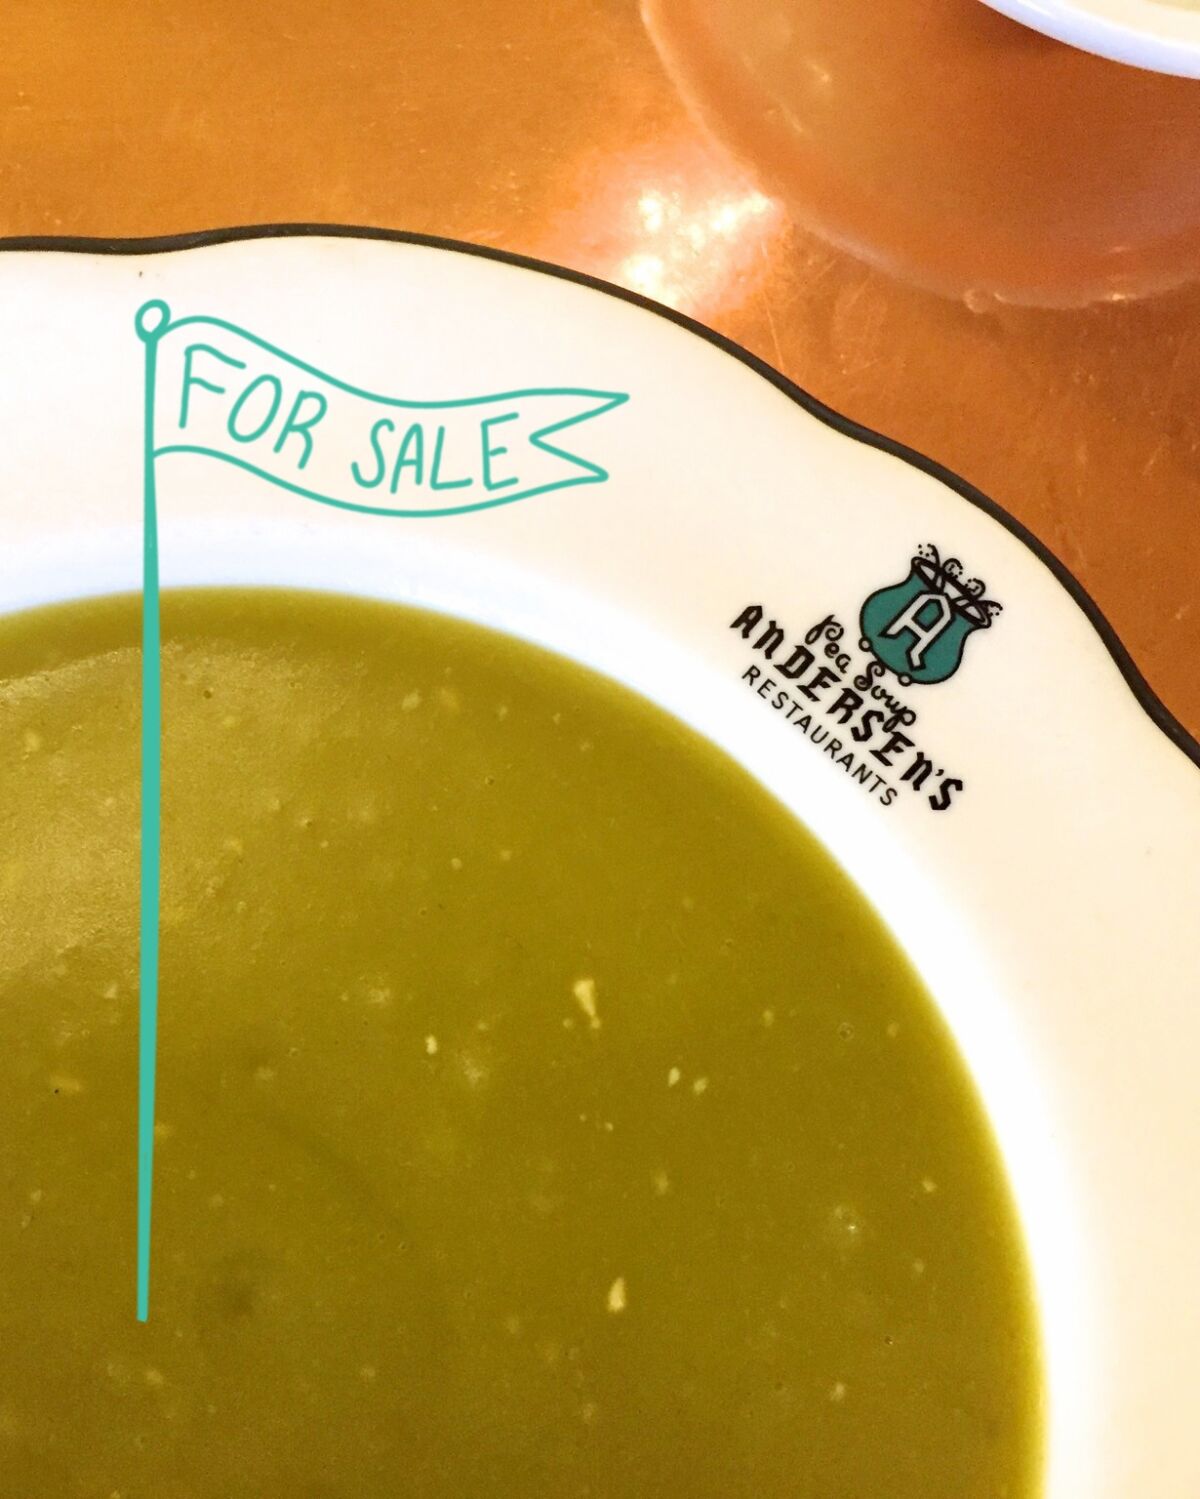 Pea Soup Andersen's pea soup with tiny illustrated "For Sale" sign